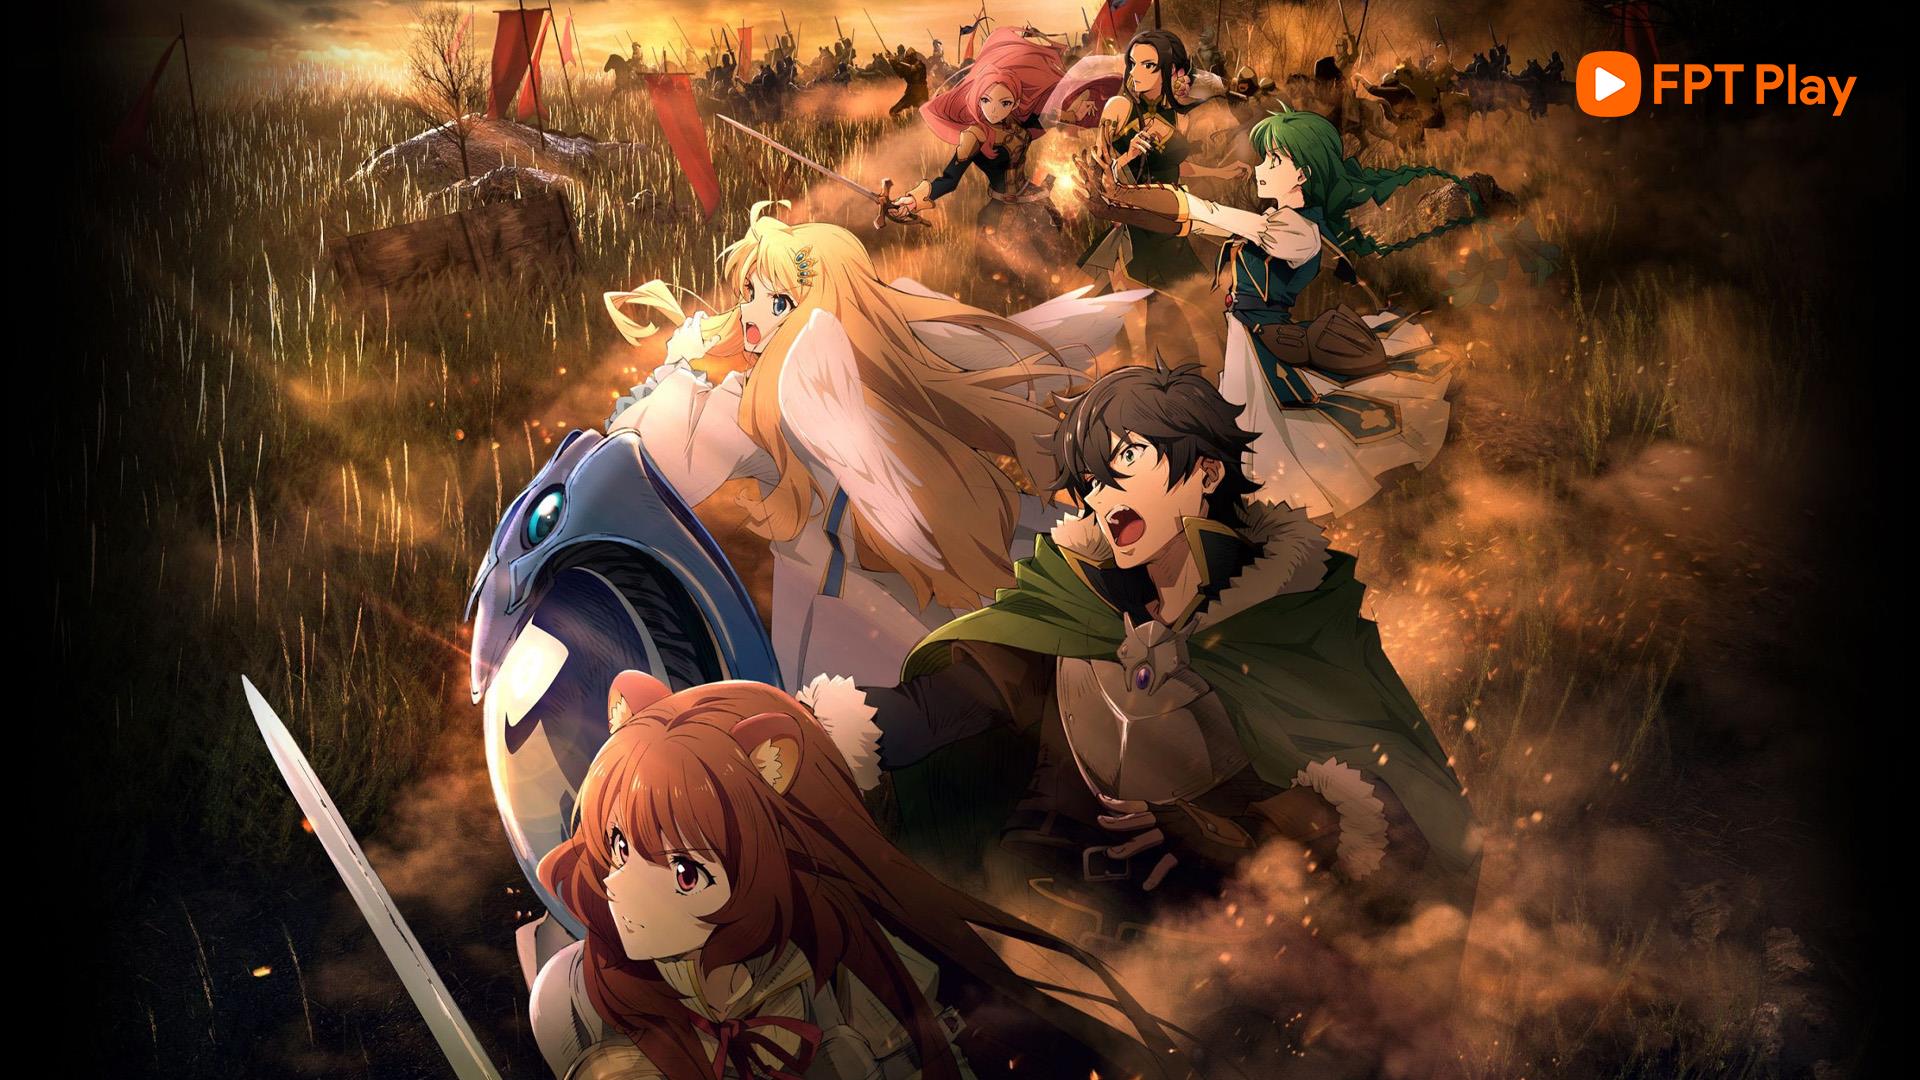 The Rising Of The Shield Hero on FPT Play: The thorny journey of the outcast hero - Photo 2.